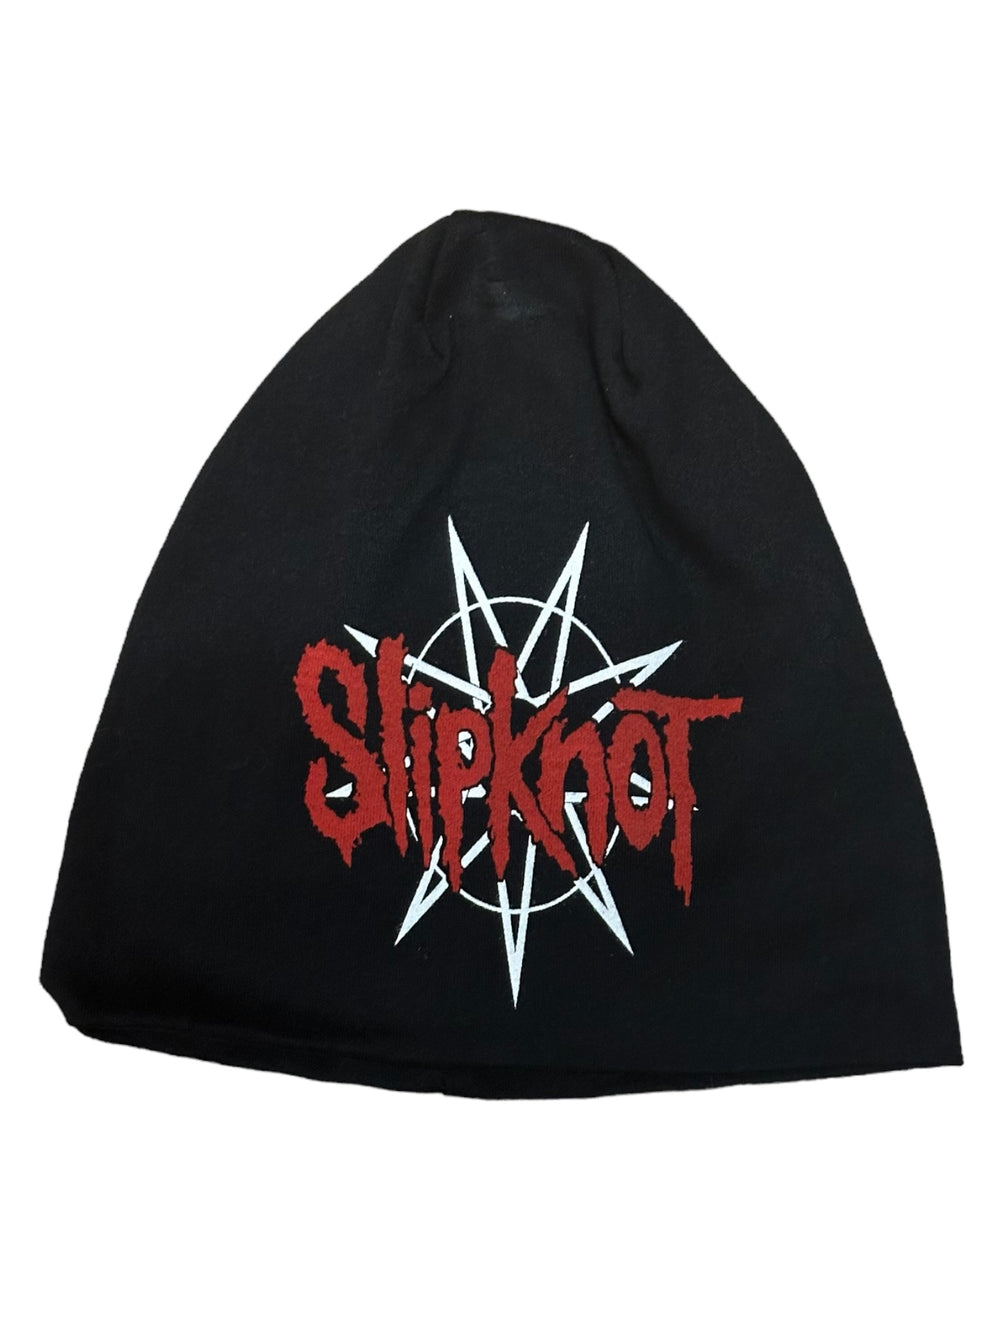 Slipknot - Nine Pointed Star Print Official Beanie Hat One Size Fits All NEW